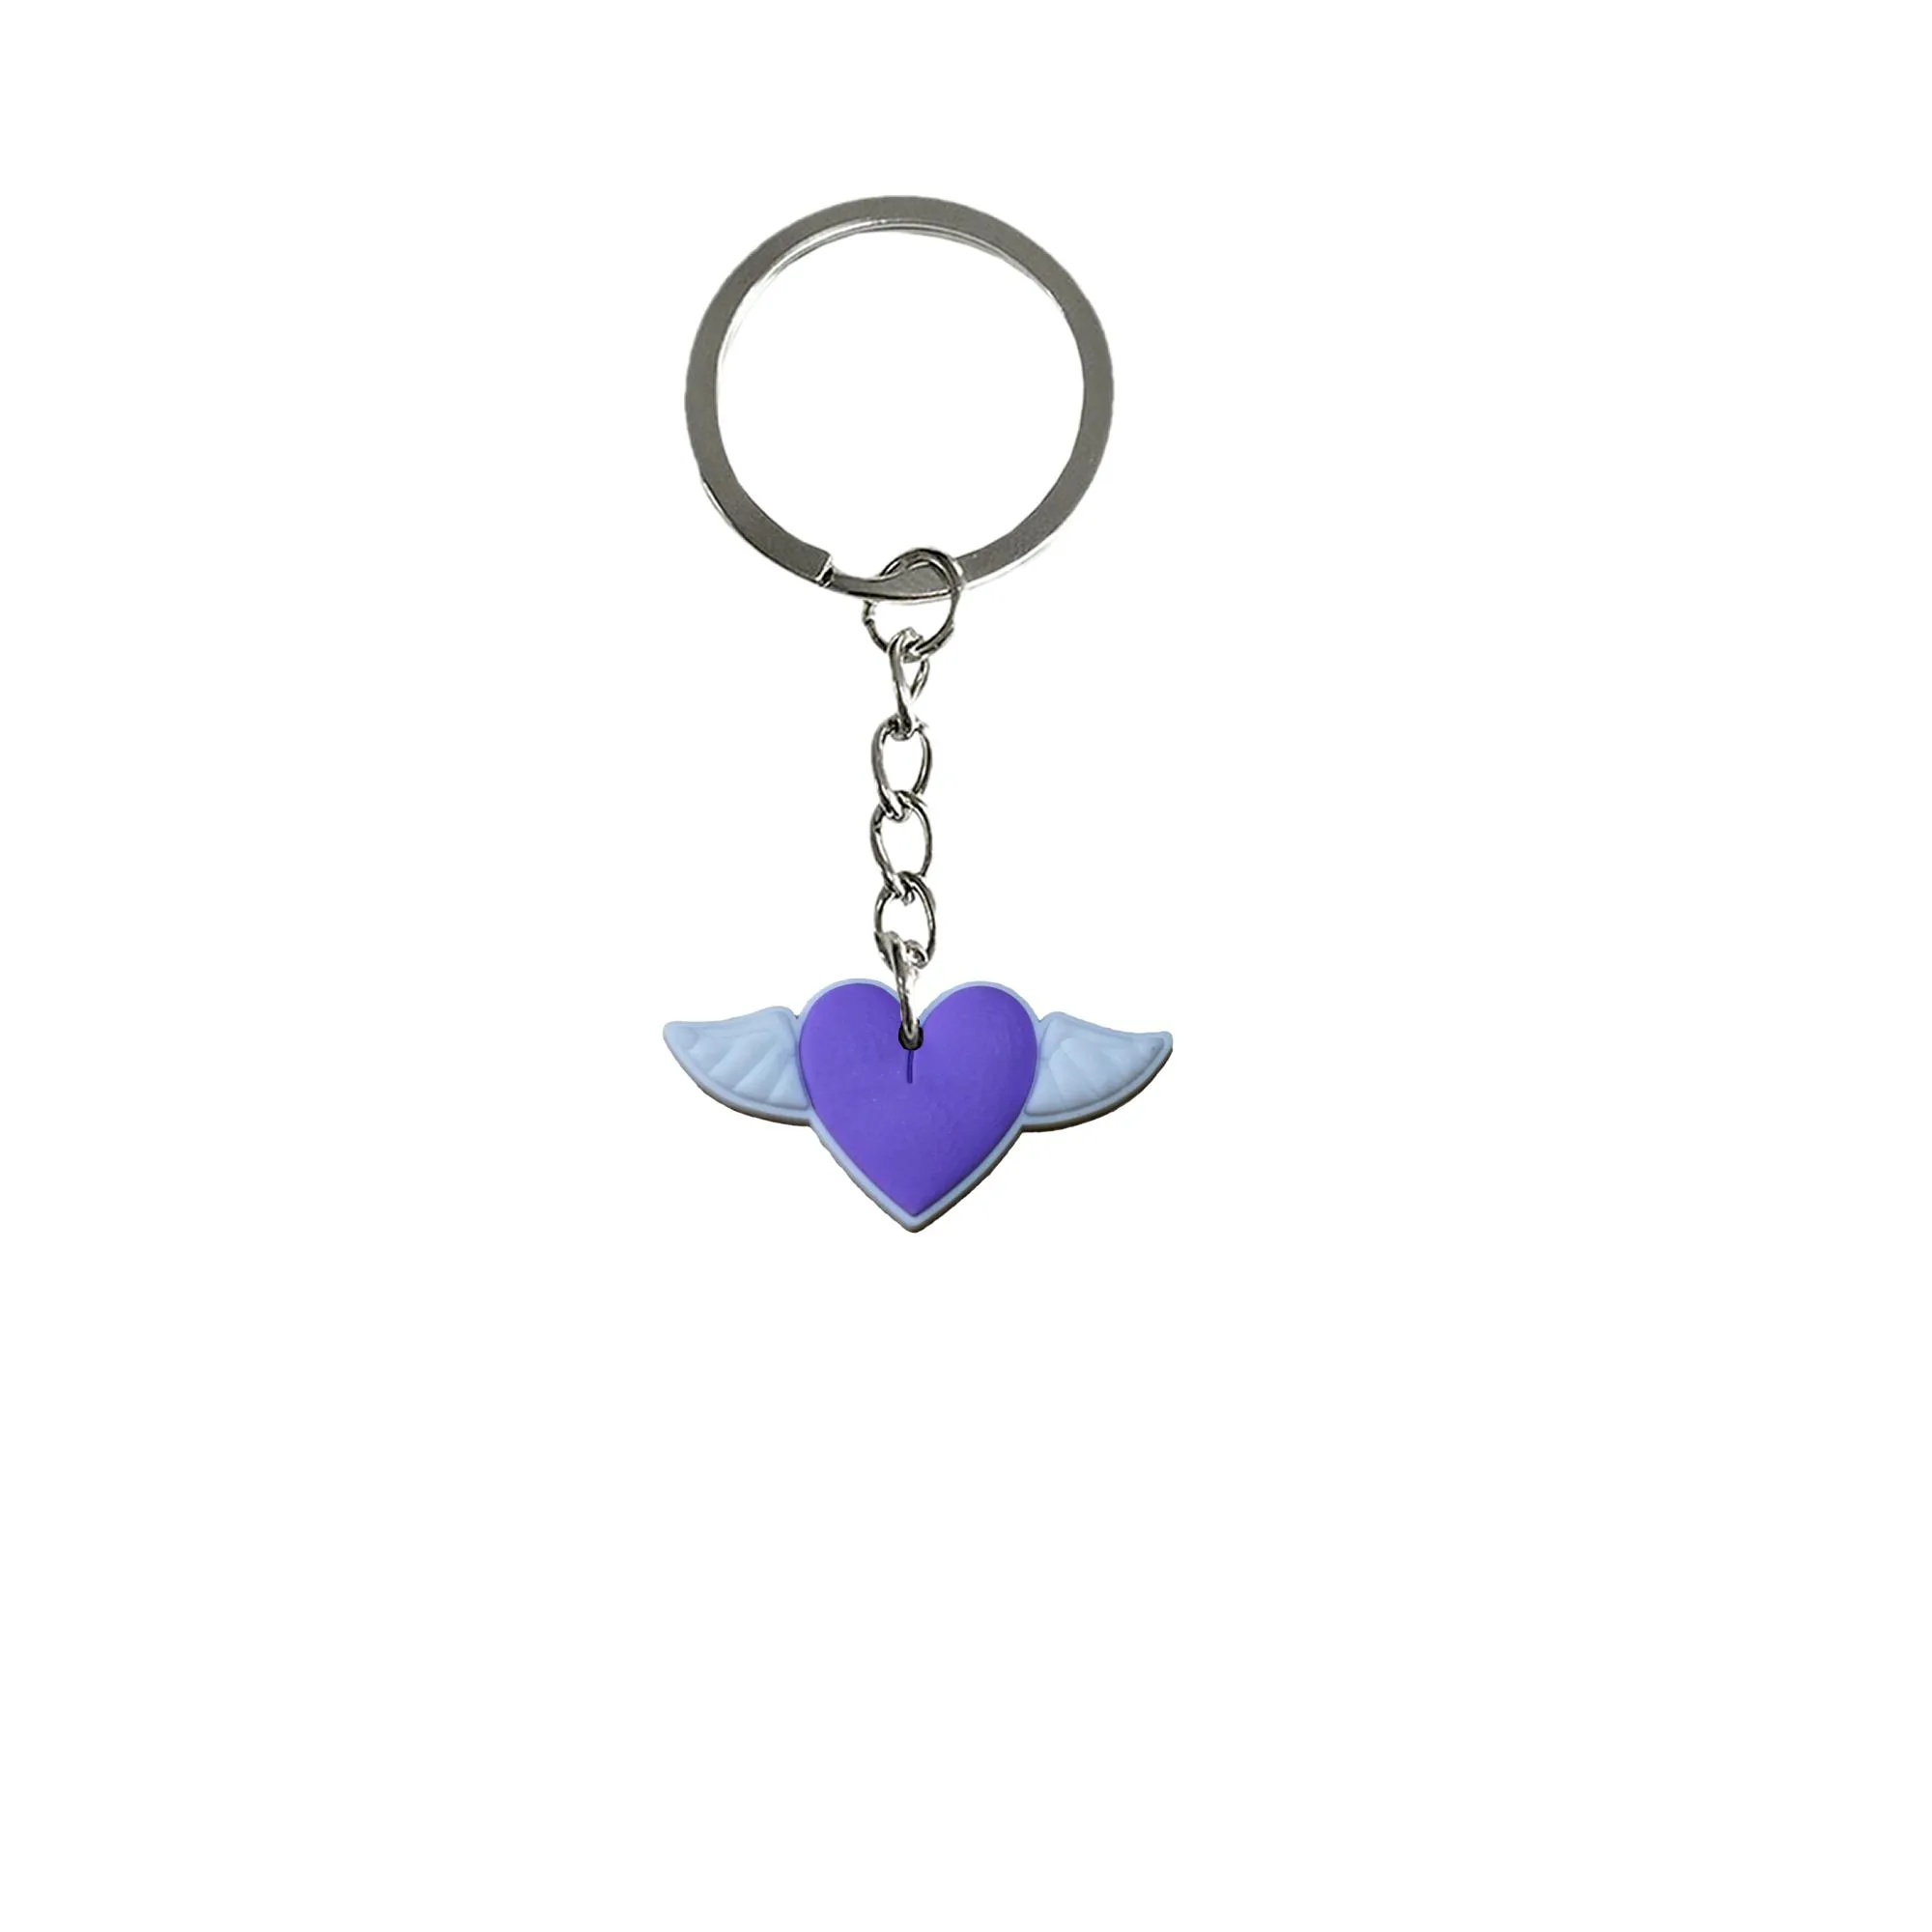 love wings keychain keychains tags goodie bag stuffer christmas gifts and holiday charms keyring for women men suitable schoolbag key ring boys